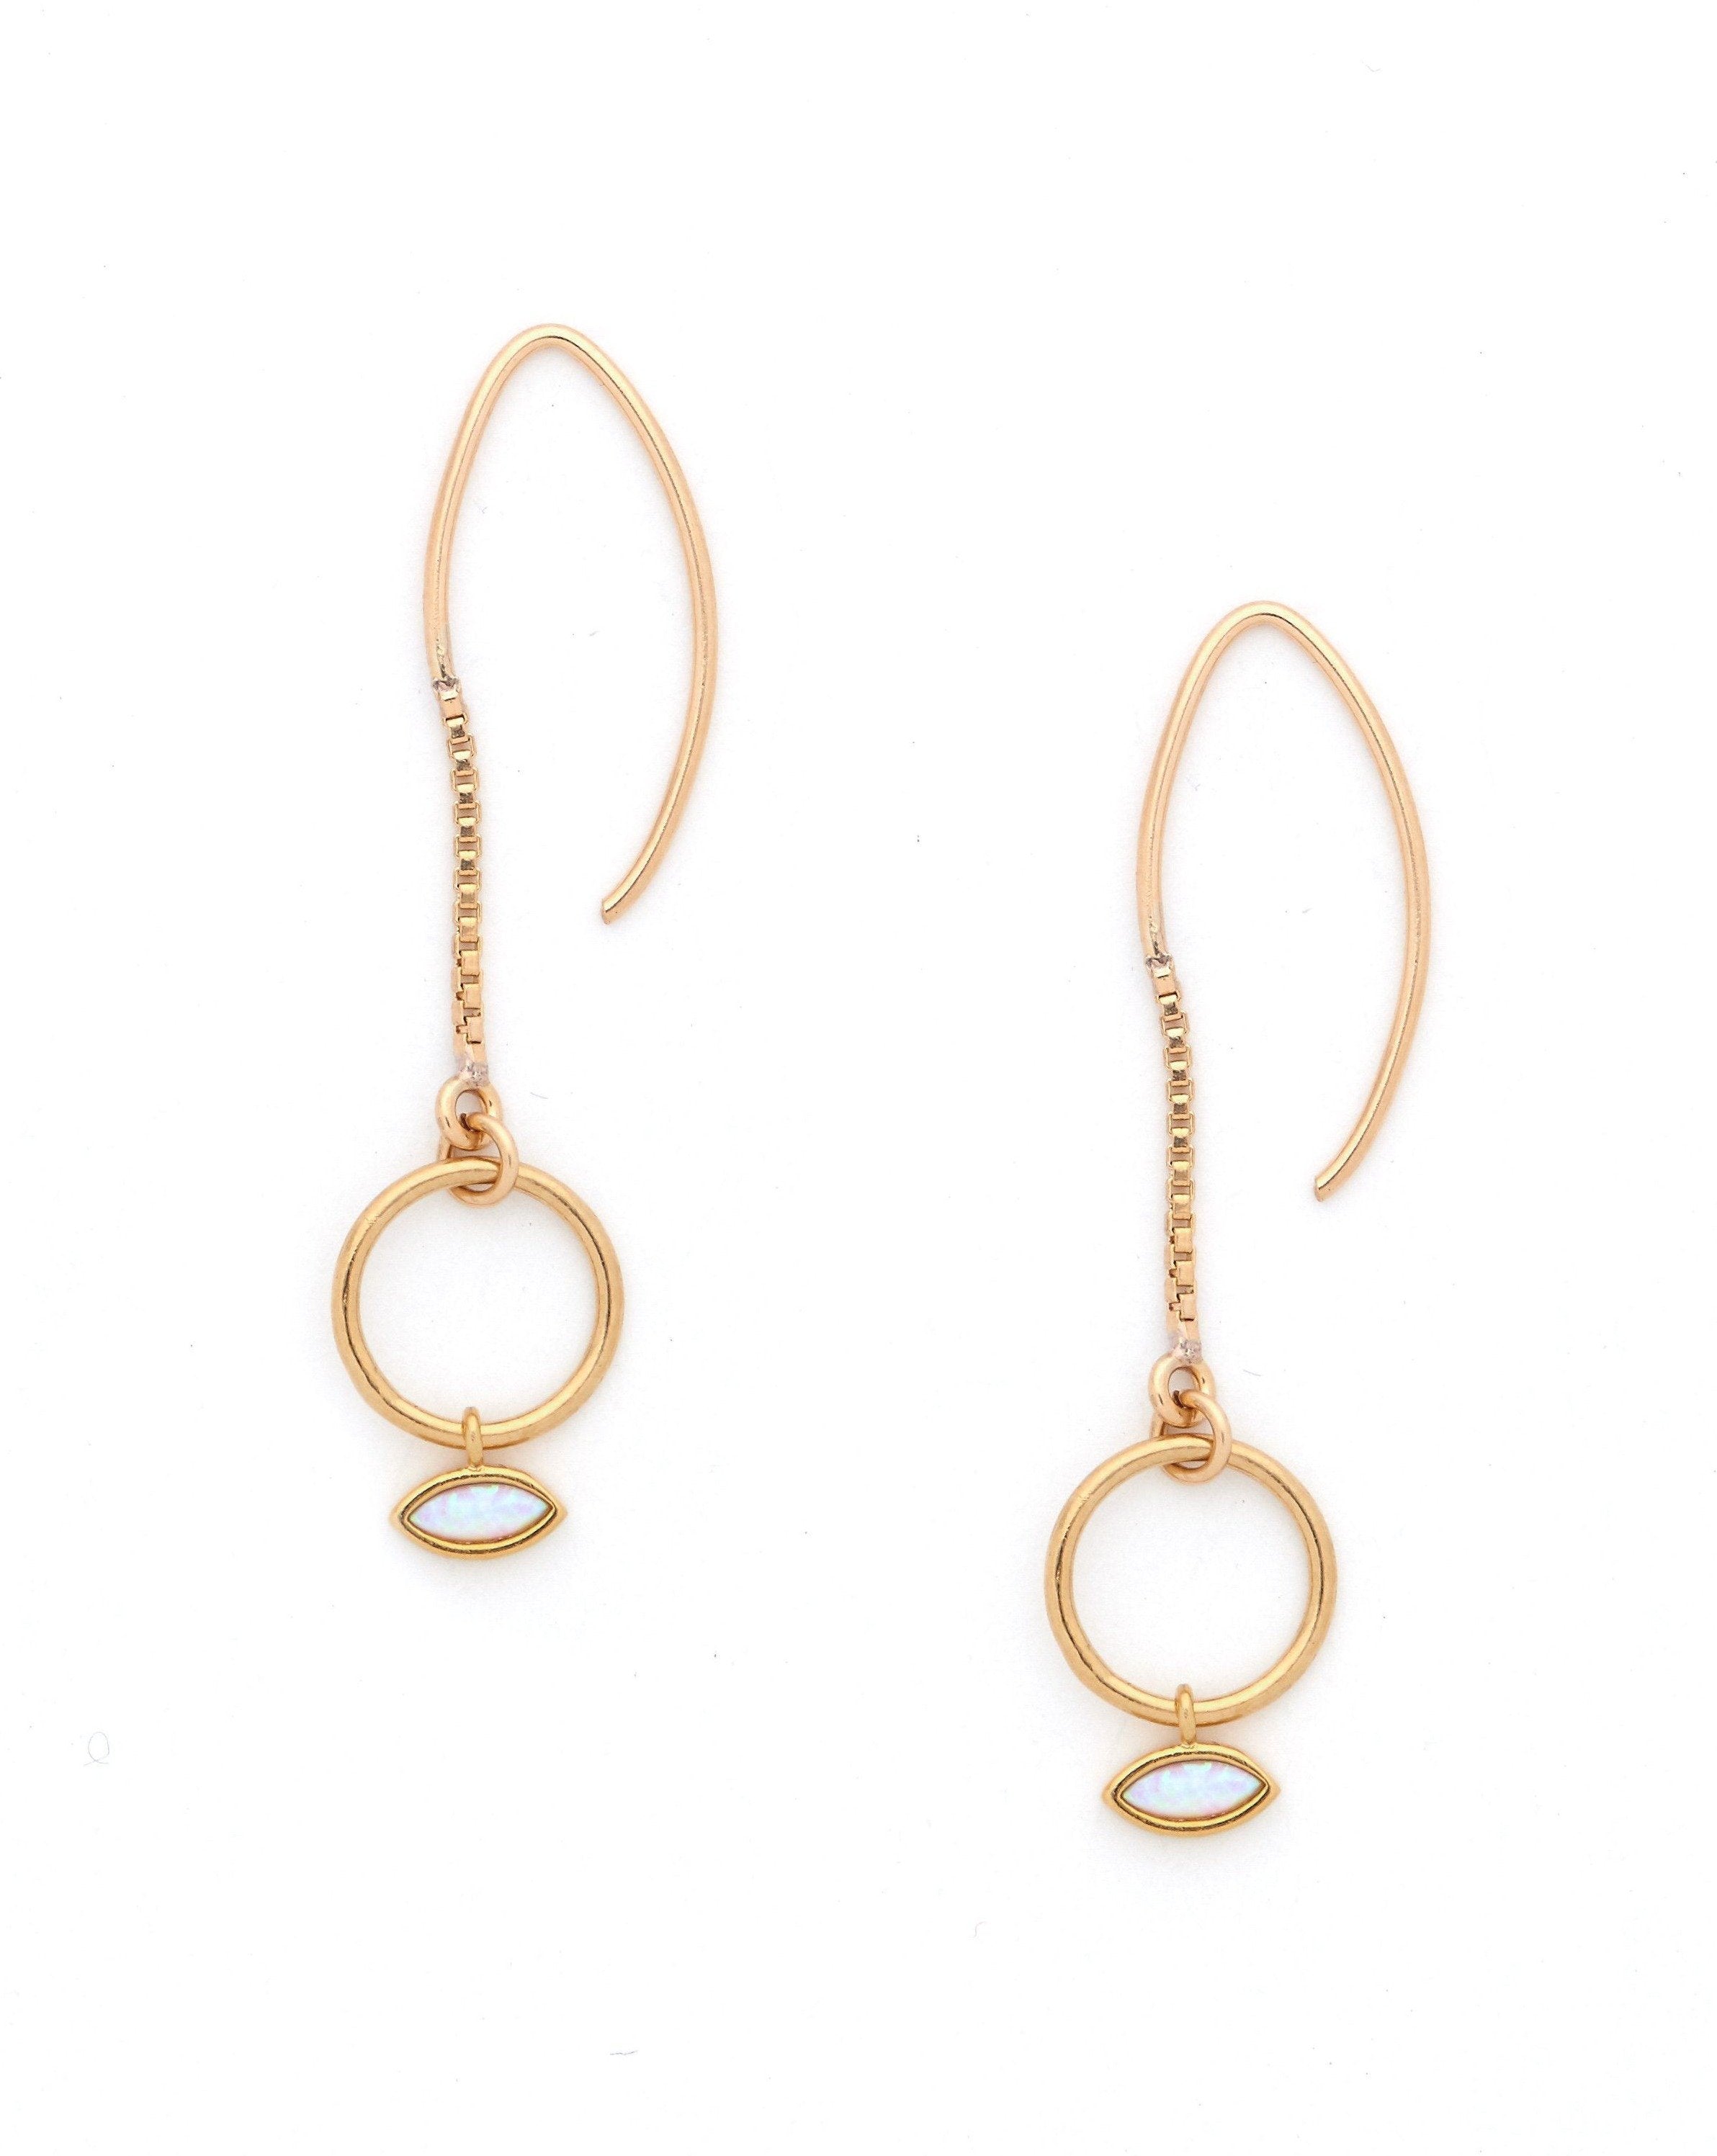 Delilah Earrings by KOZAKH. 1.5 inch drop hook earrings, crafted in 14K Gold Filled, featuring a Marquise Opal charm.